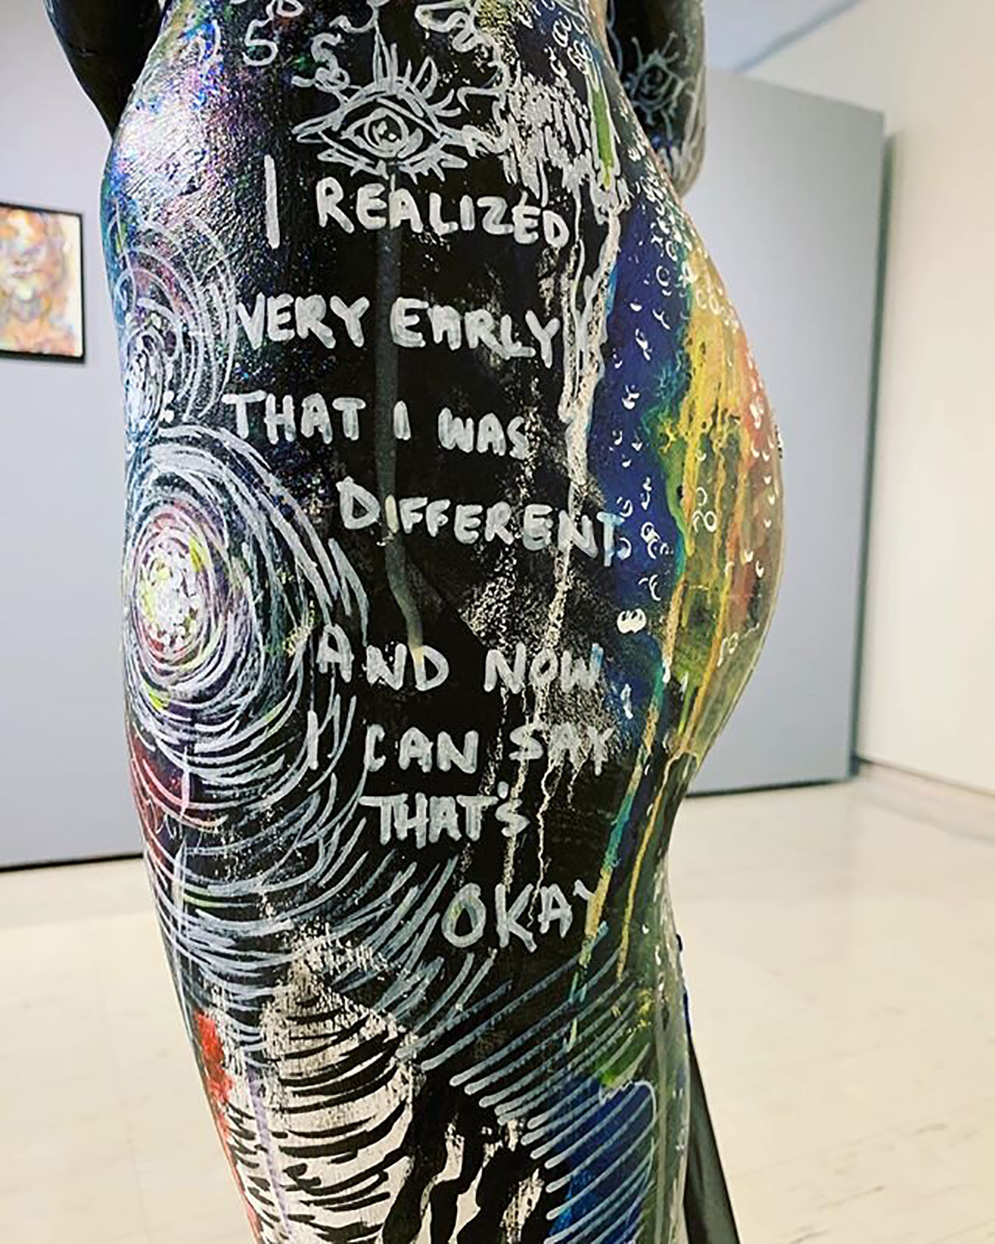 A close up of a mannequin’s lower left side. The mannequin’s side is covered in white, black, blue, and yellow paint with circles, stars, eyeballs, and lines on the side. The words on the side of the mannequin say “I realized very early that I was different and now I can say that’s okay. Behind the mannequin is a light gray and white gallery wall with one painting behind it.